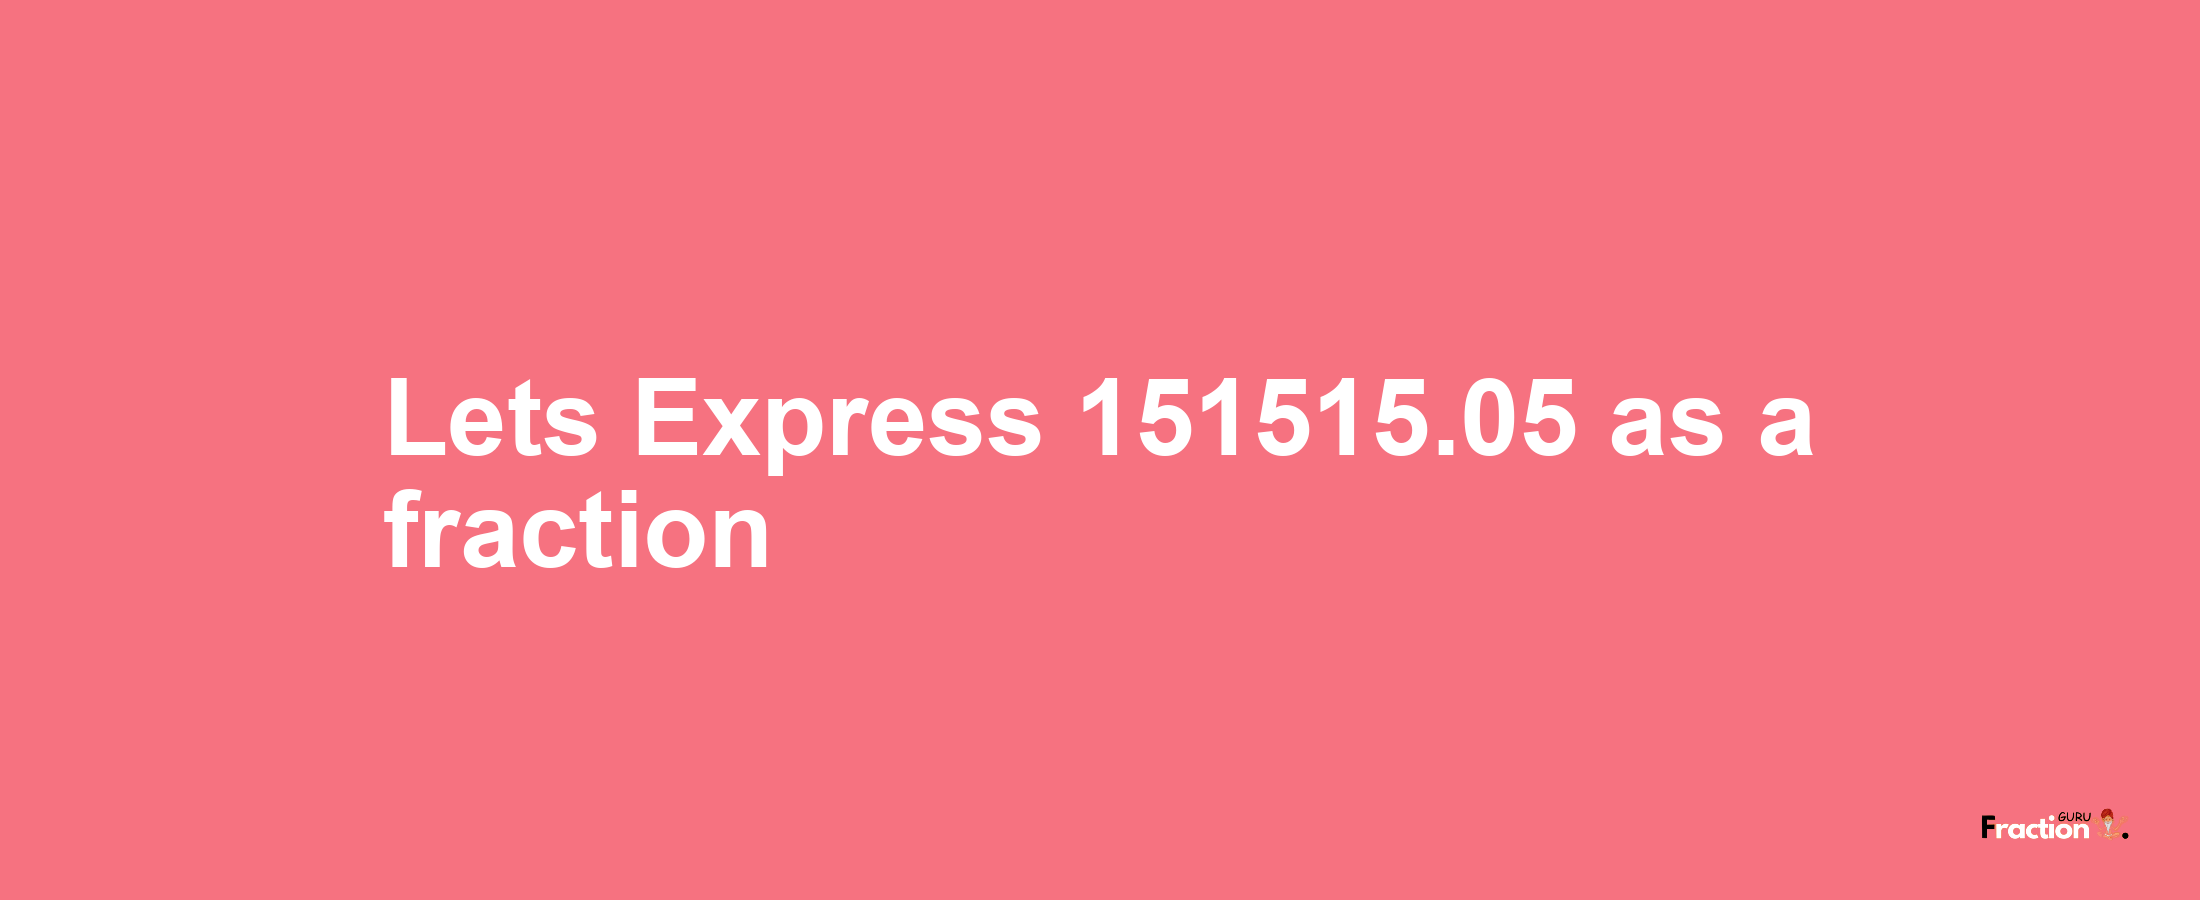 Lets Express 151515.05 as afraction